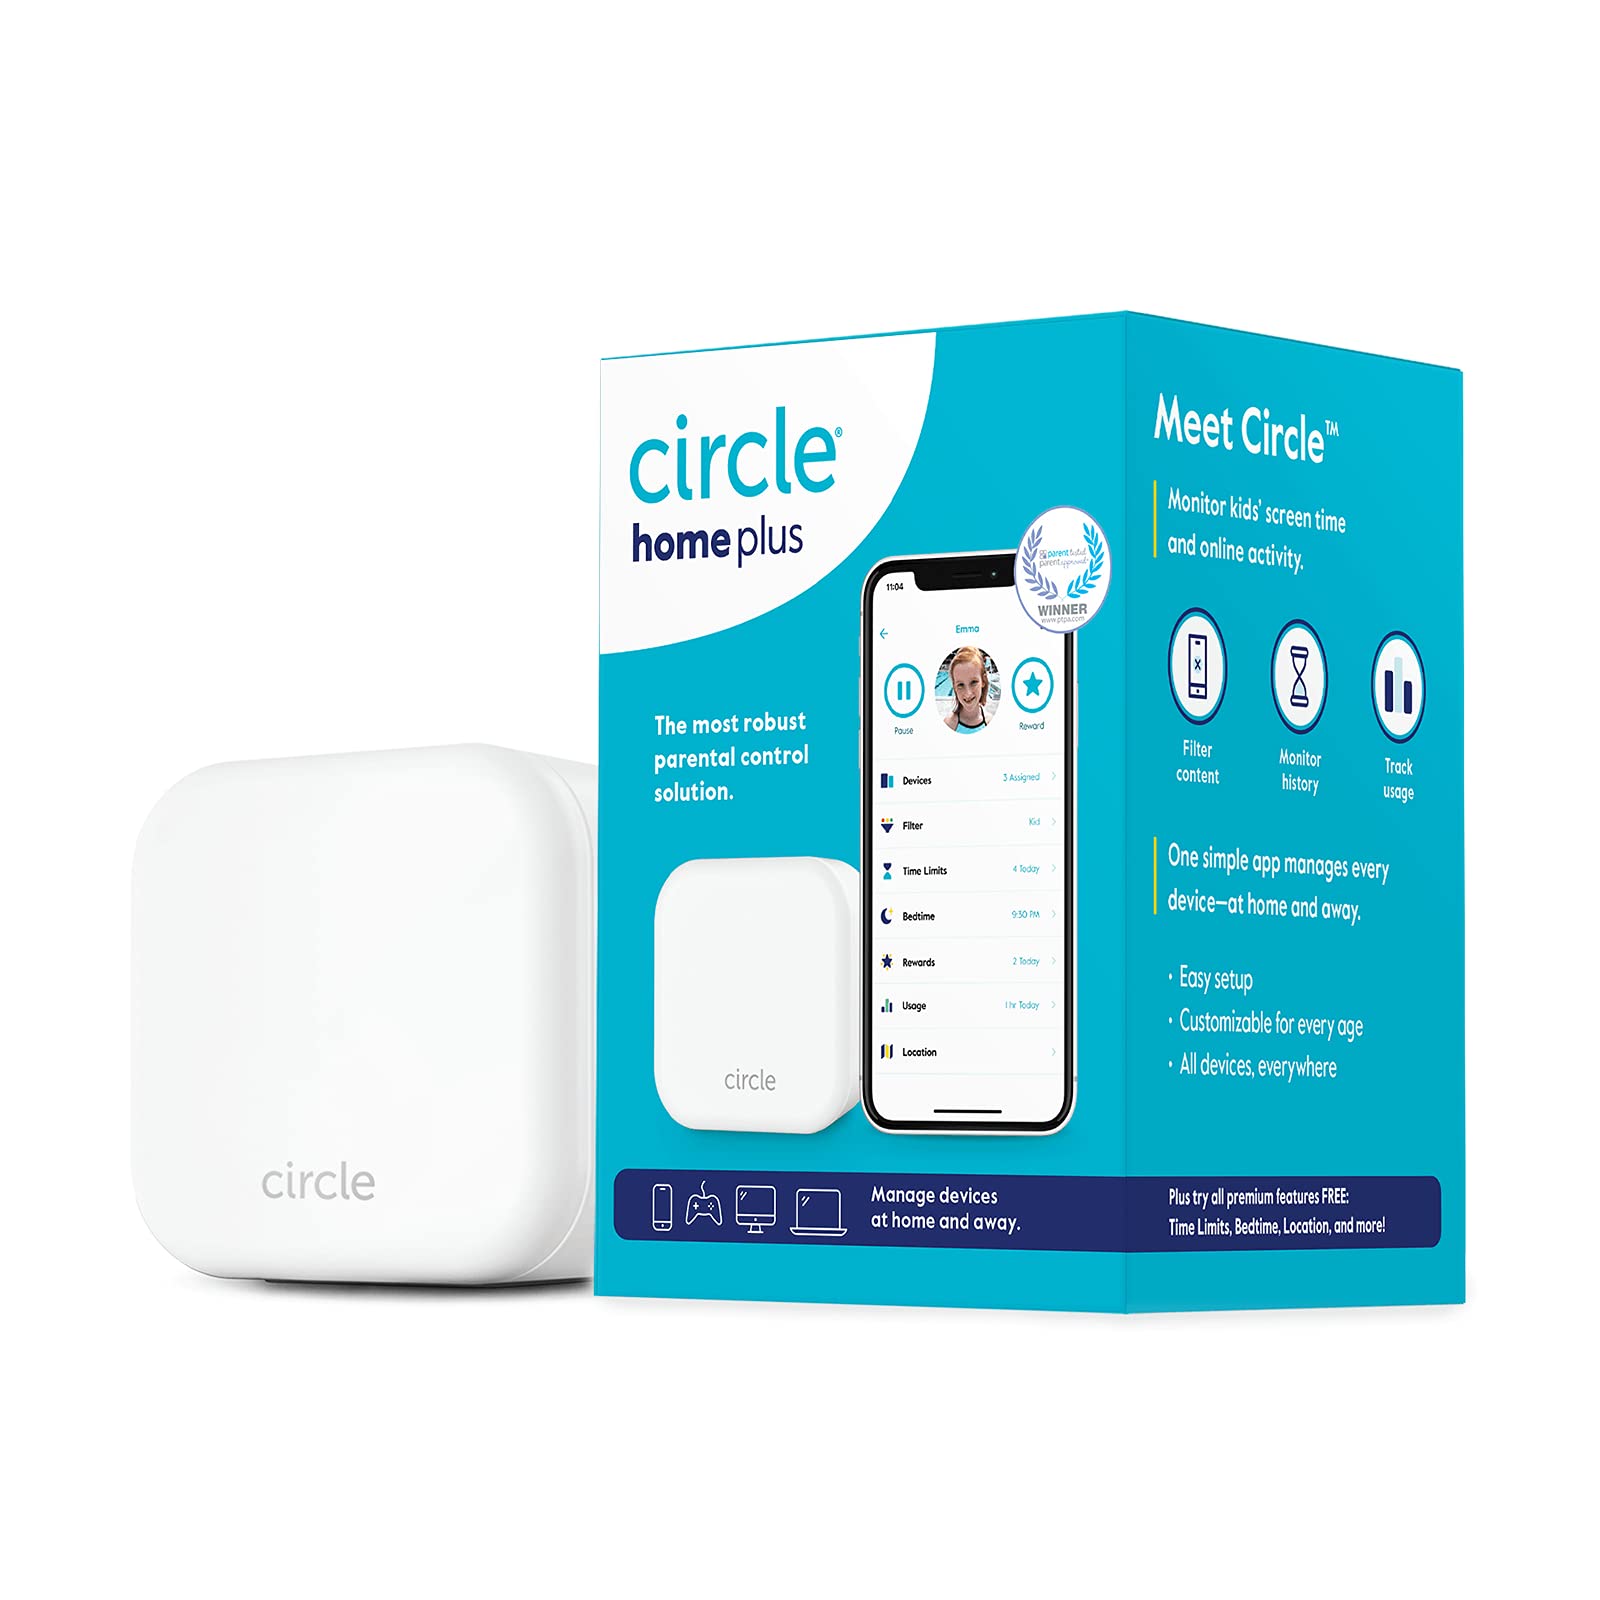 Circle Parental Controls 3 Month Subscription - Internet & Mobile Devices - Works on WiFi, Android & iOS Devices - Control Apps, Set Screen Time Li...